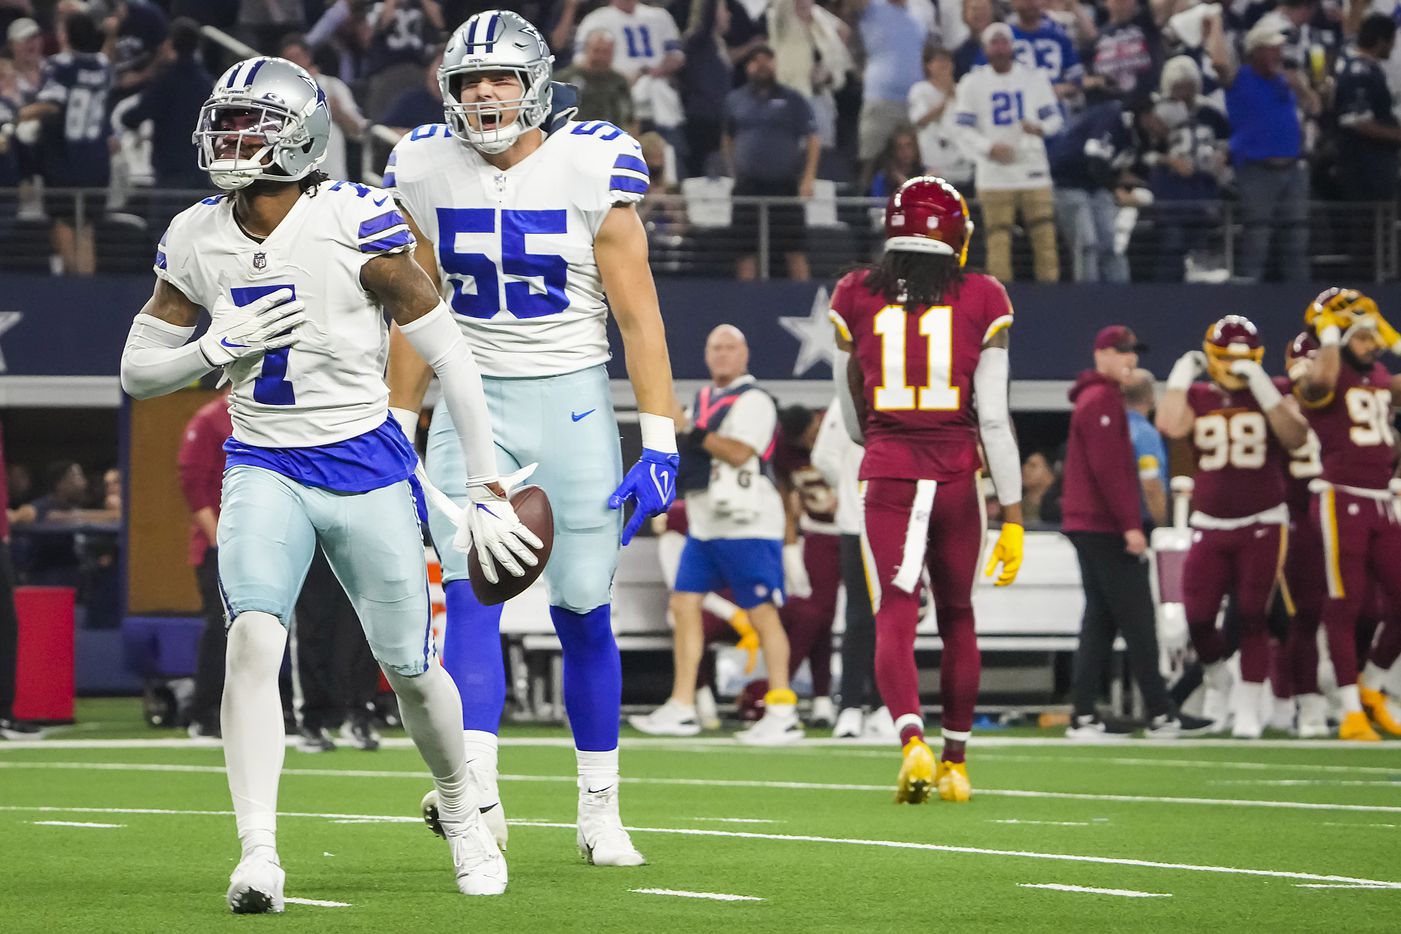 Dallas Cowboys cornerback Trevon Diggs (7) celebrates with outside linebacker Leighton Vander Esch (55) after intercepting a pass intended for Washington Football Team wide receiver Terry McLaurin during the first half of an NFL football game at AT&T Stadium on Sunday, Dec. 26, 2021, in Arlington.